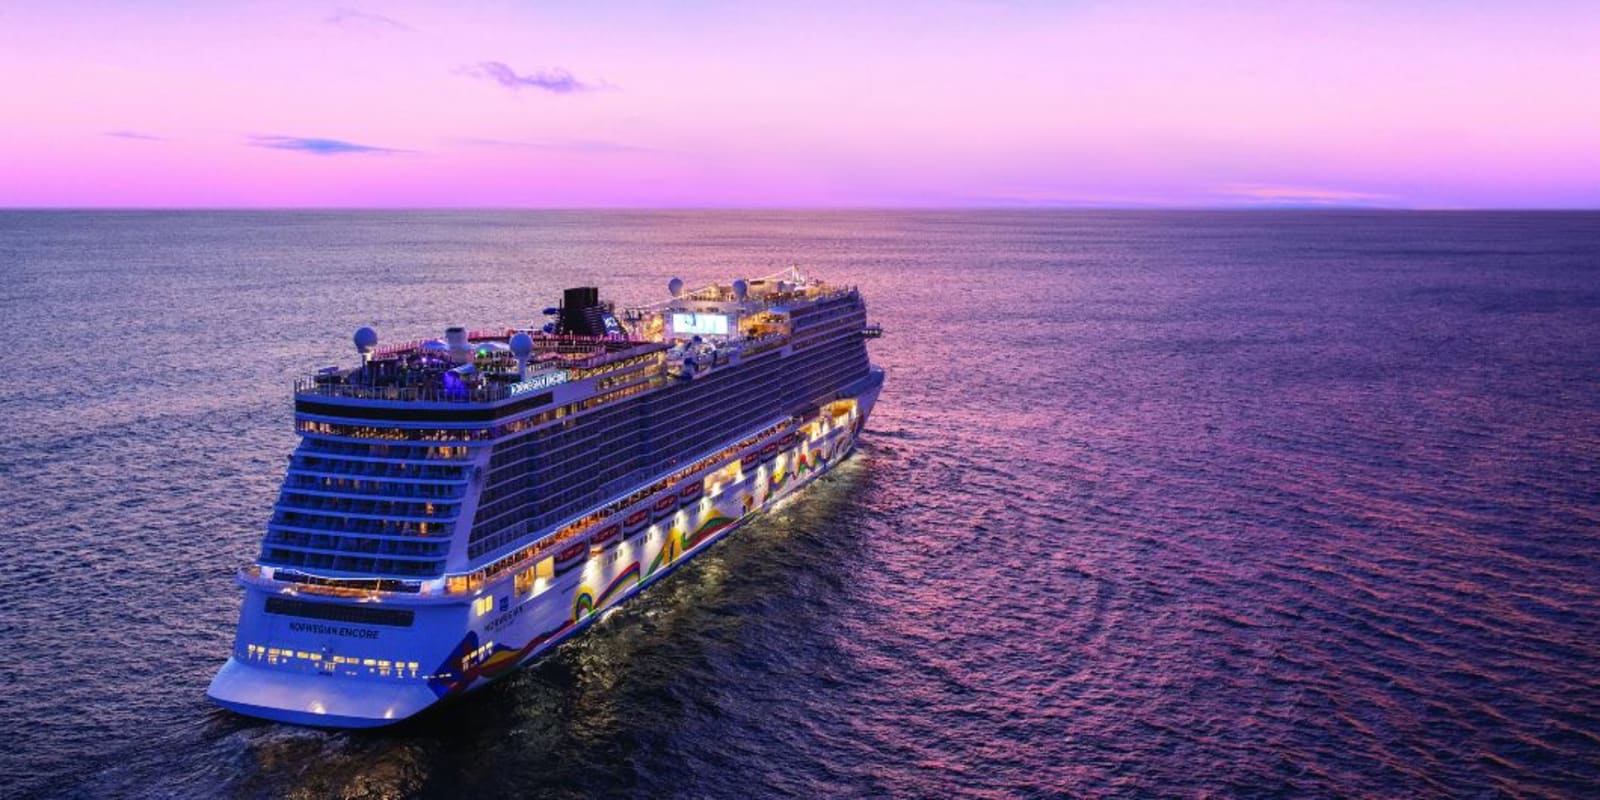 A large cruise ship sailing towards the horizon as the sunset turns the sky pink and purple.